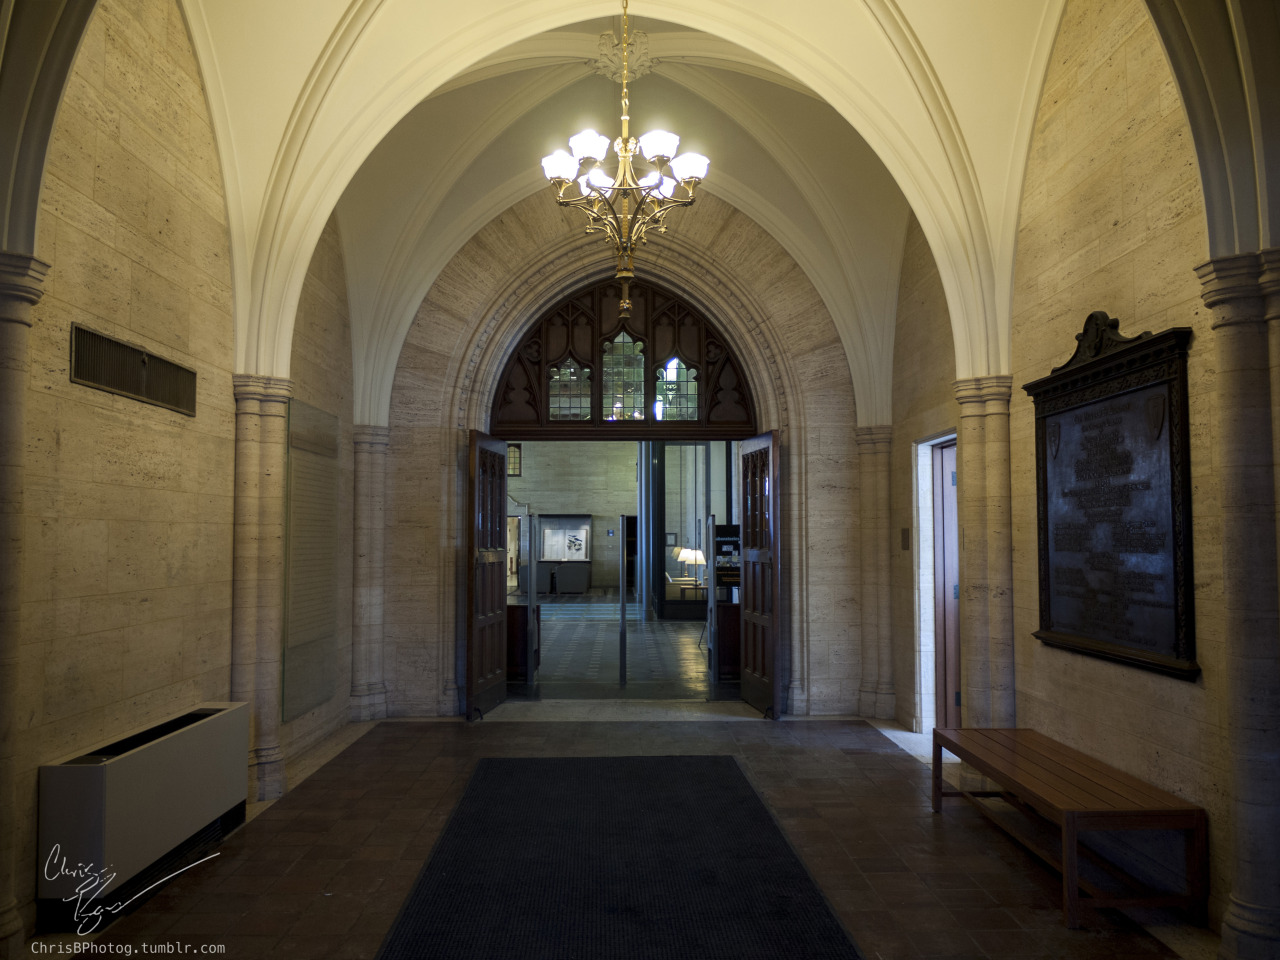 Also the entrance to Linderman is deceptively dark. And always turns out blurry